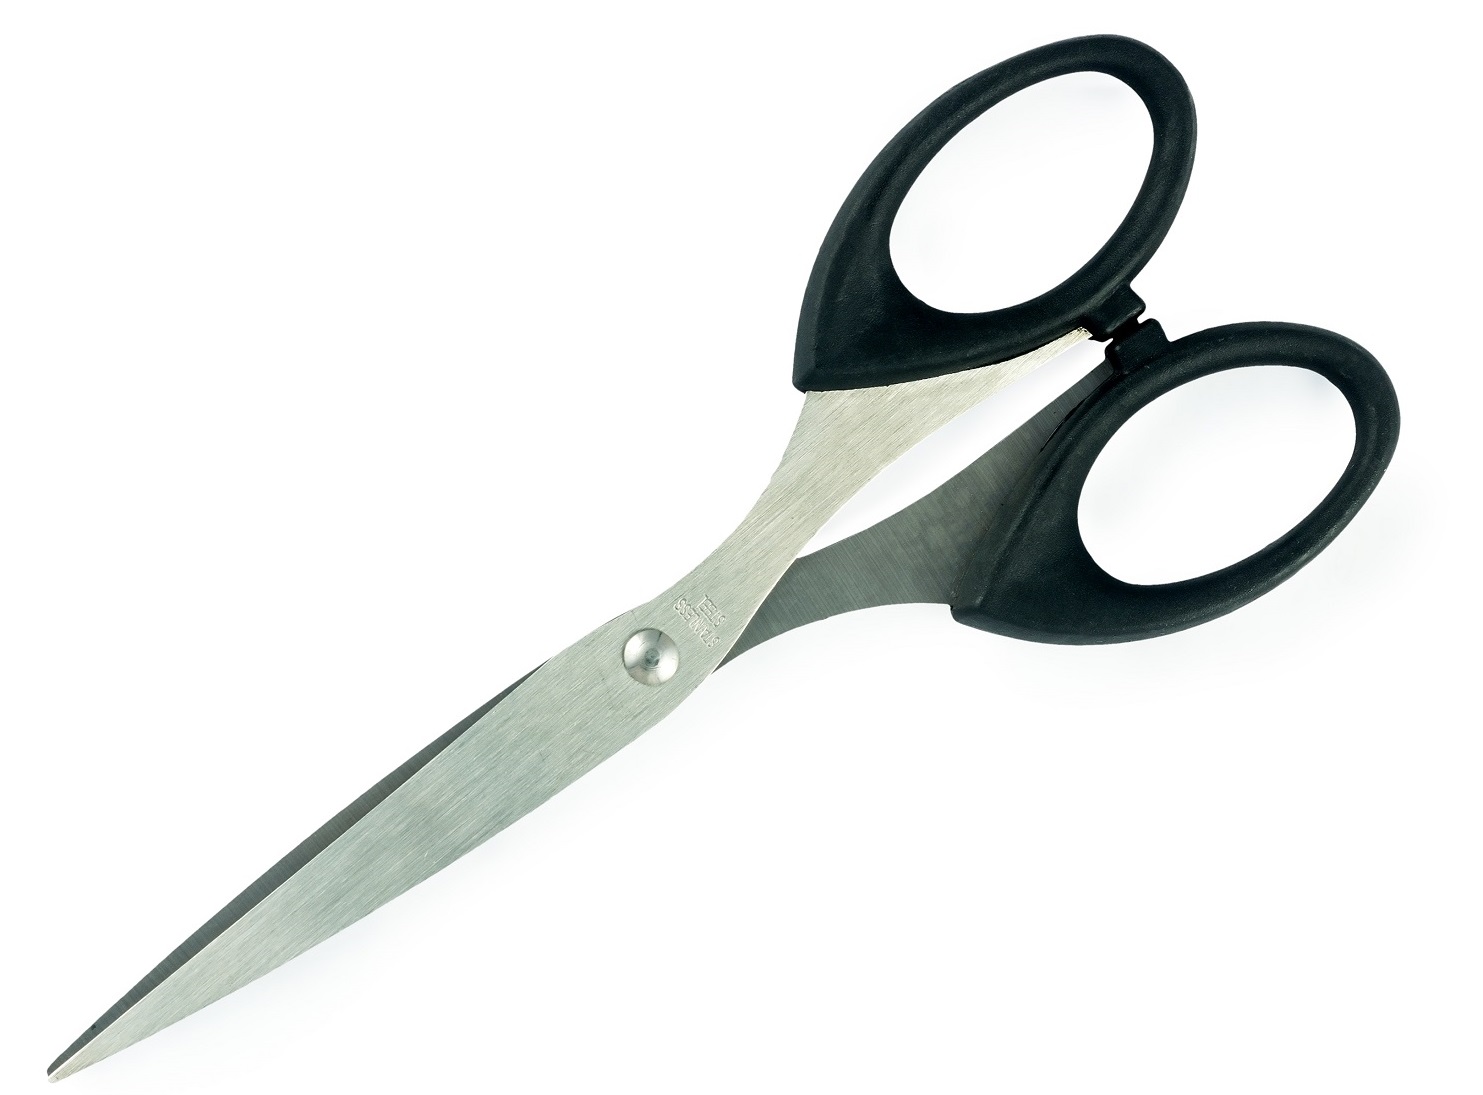 ️ If You Can't Spell Names of Everyday Items, You Need … Quiz 02 Scissors